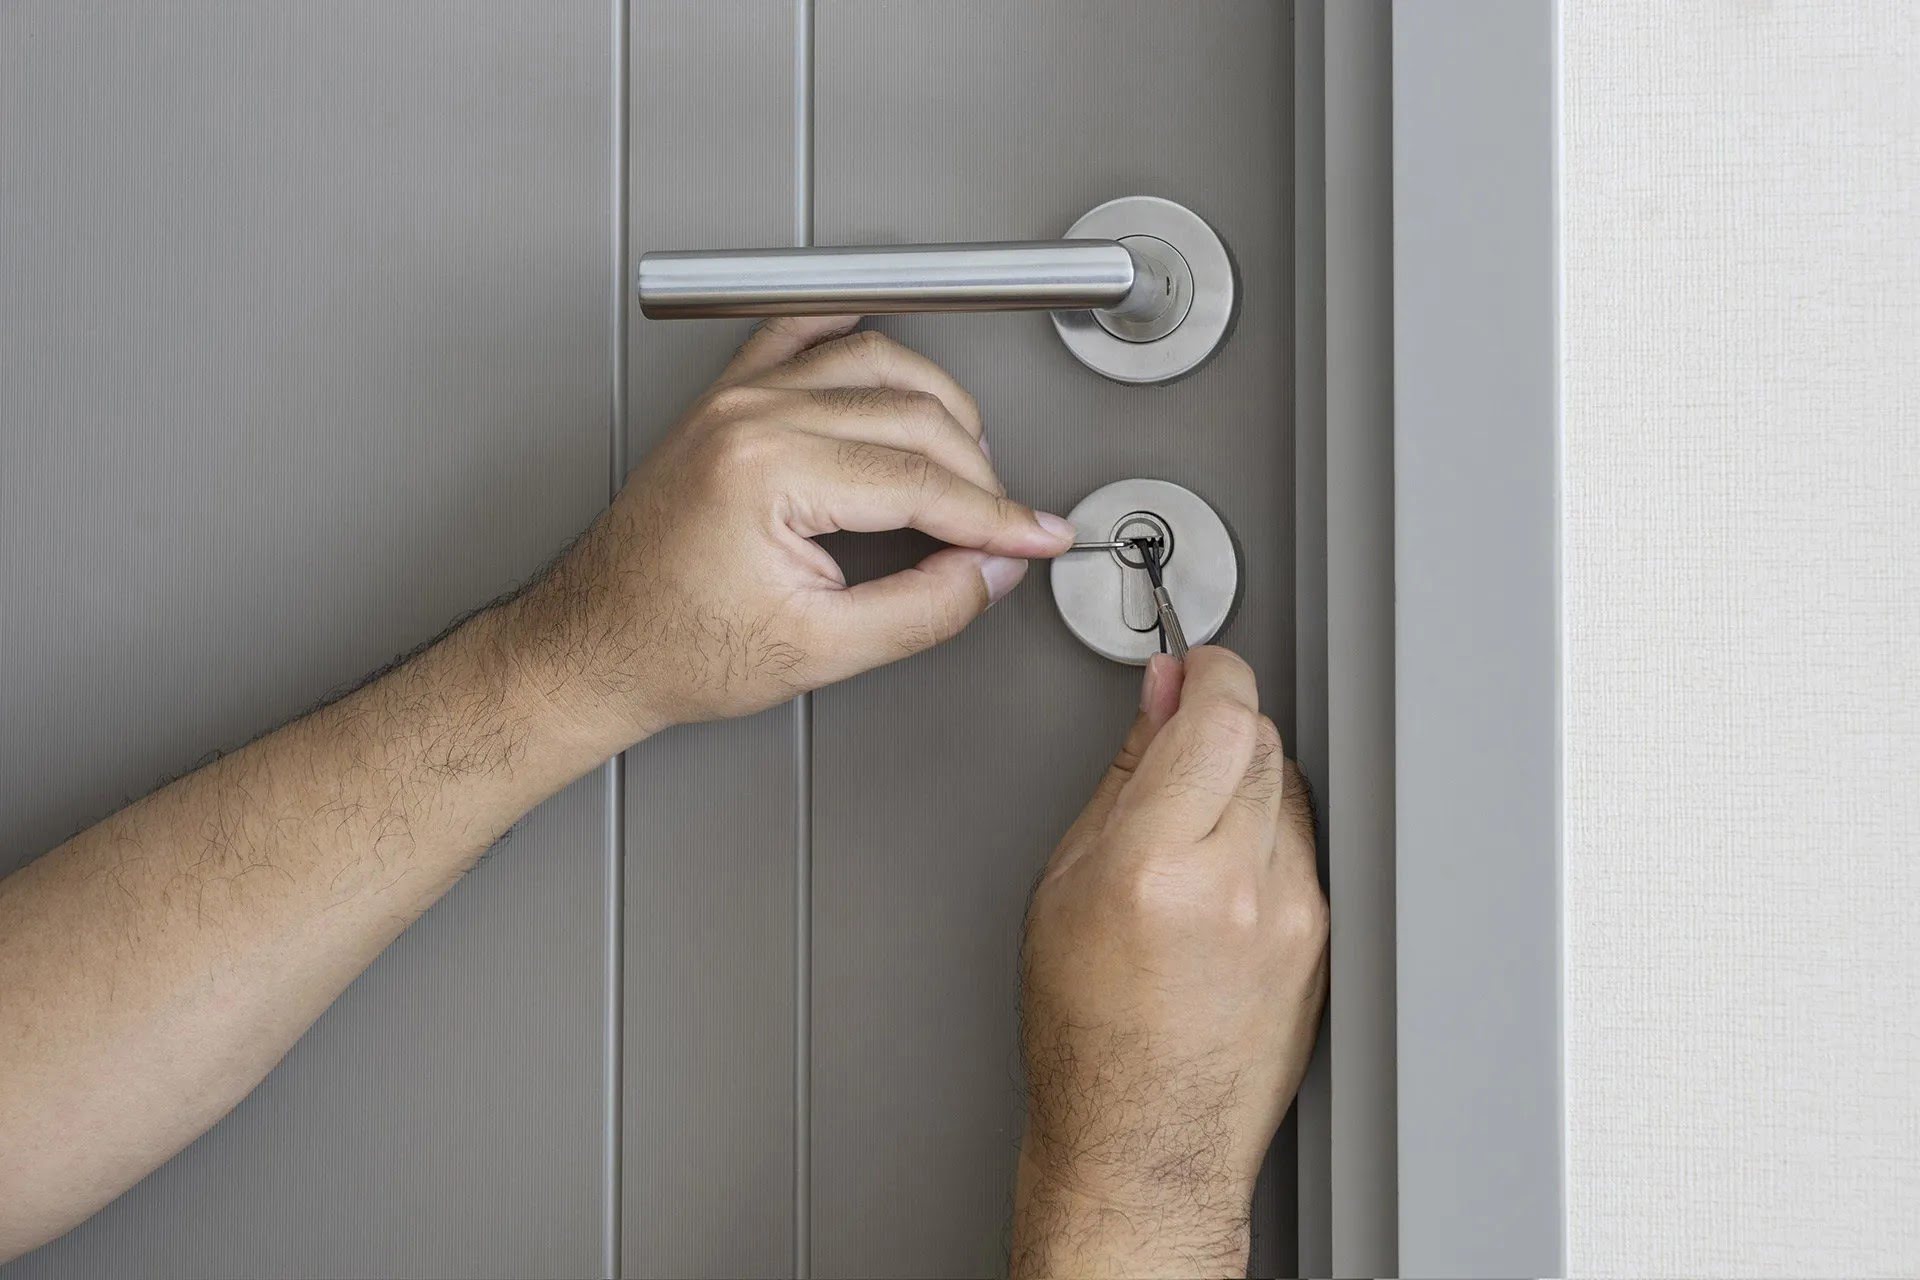 How To Remove Door Lock Without Key